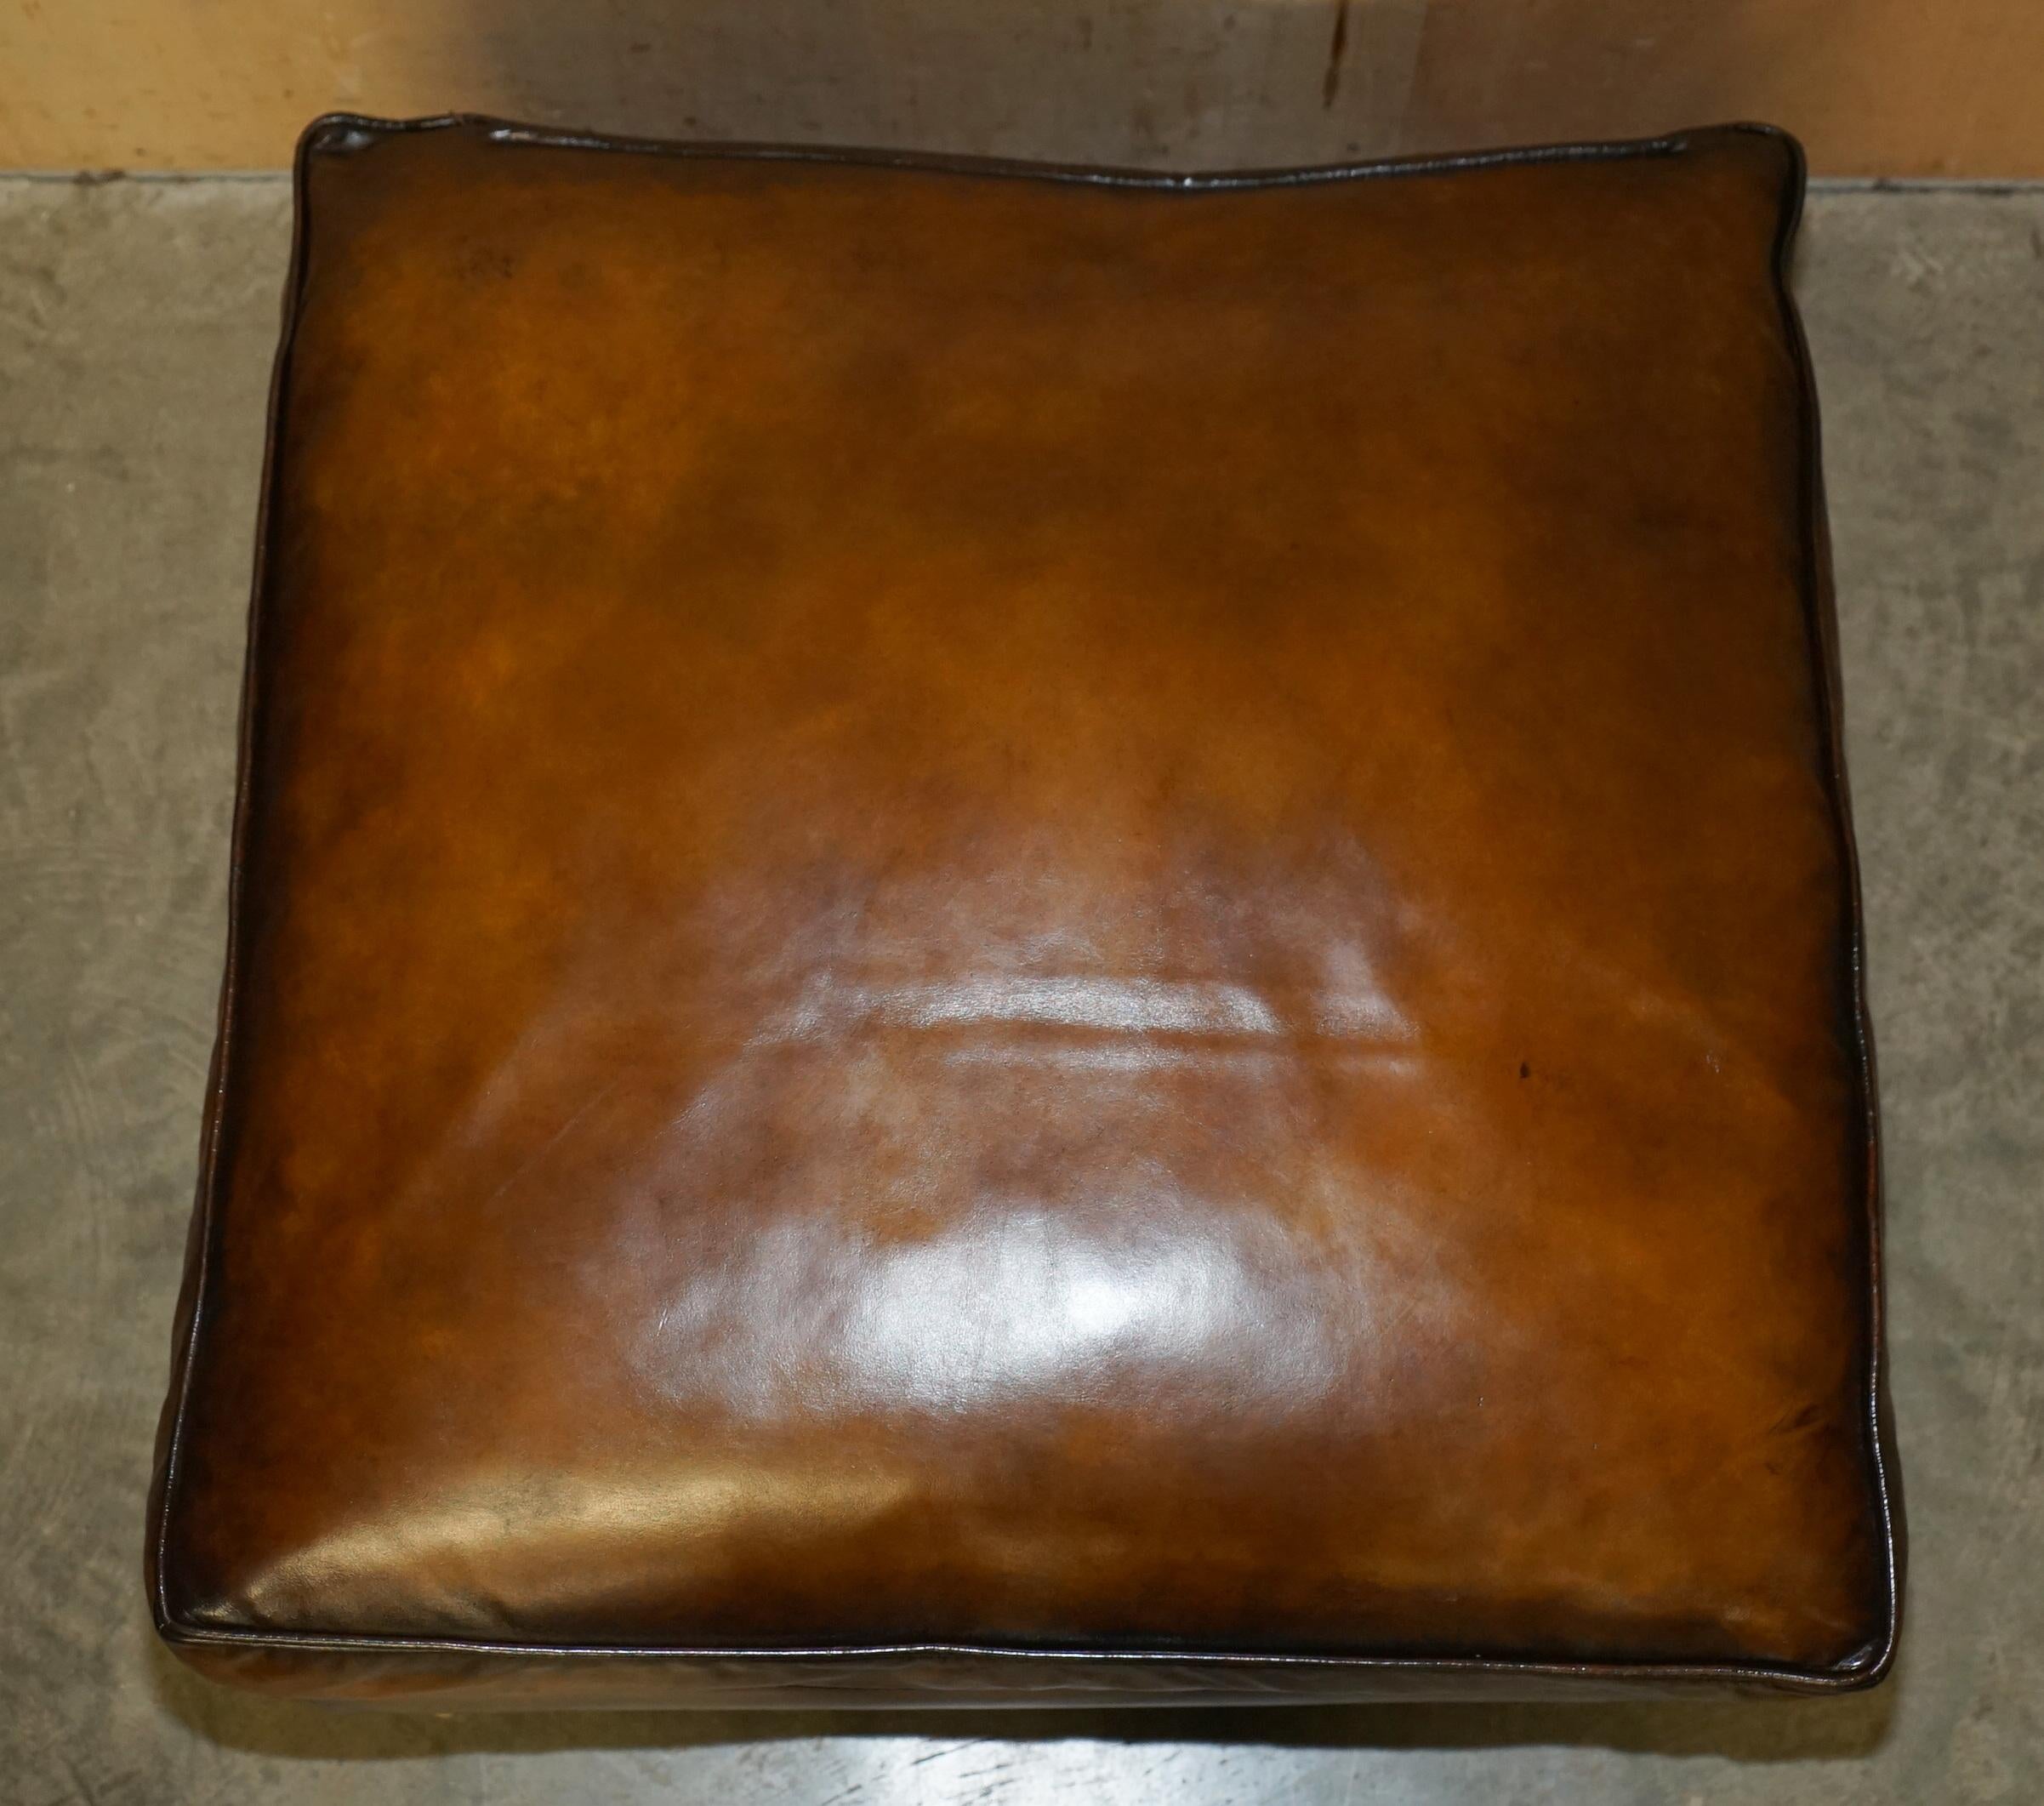 EXTRA LARGE FEATHER SEATHER SEAT RESTORED BROWN LEATHER OTTOMAN FOOTSTOOL PART OF SUiTE (Englisch) im Angebot